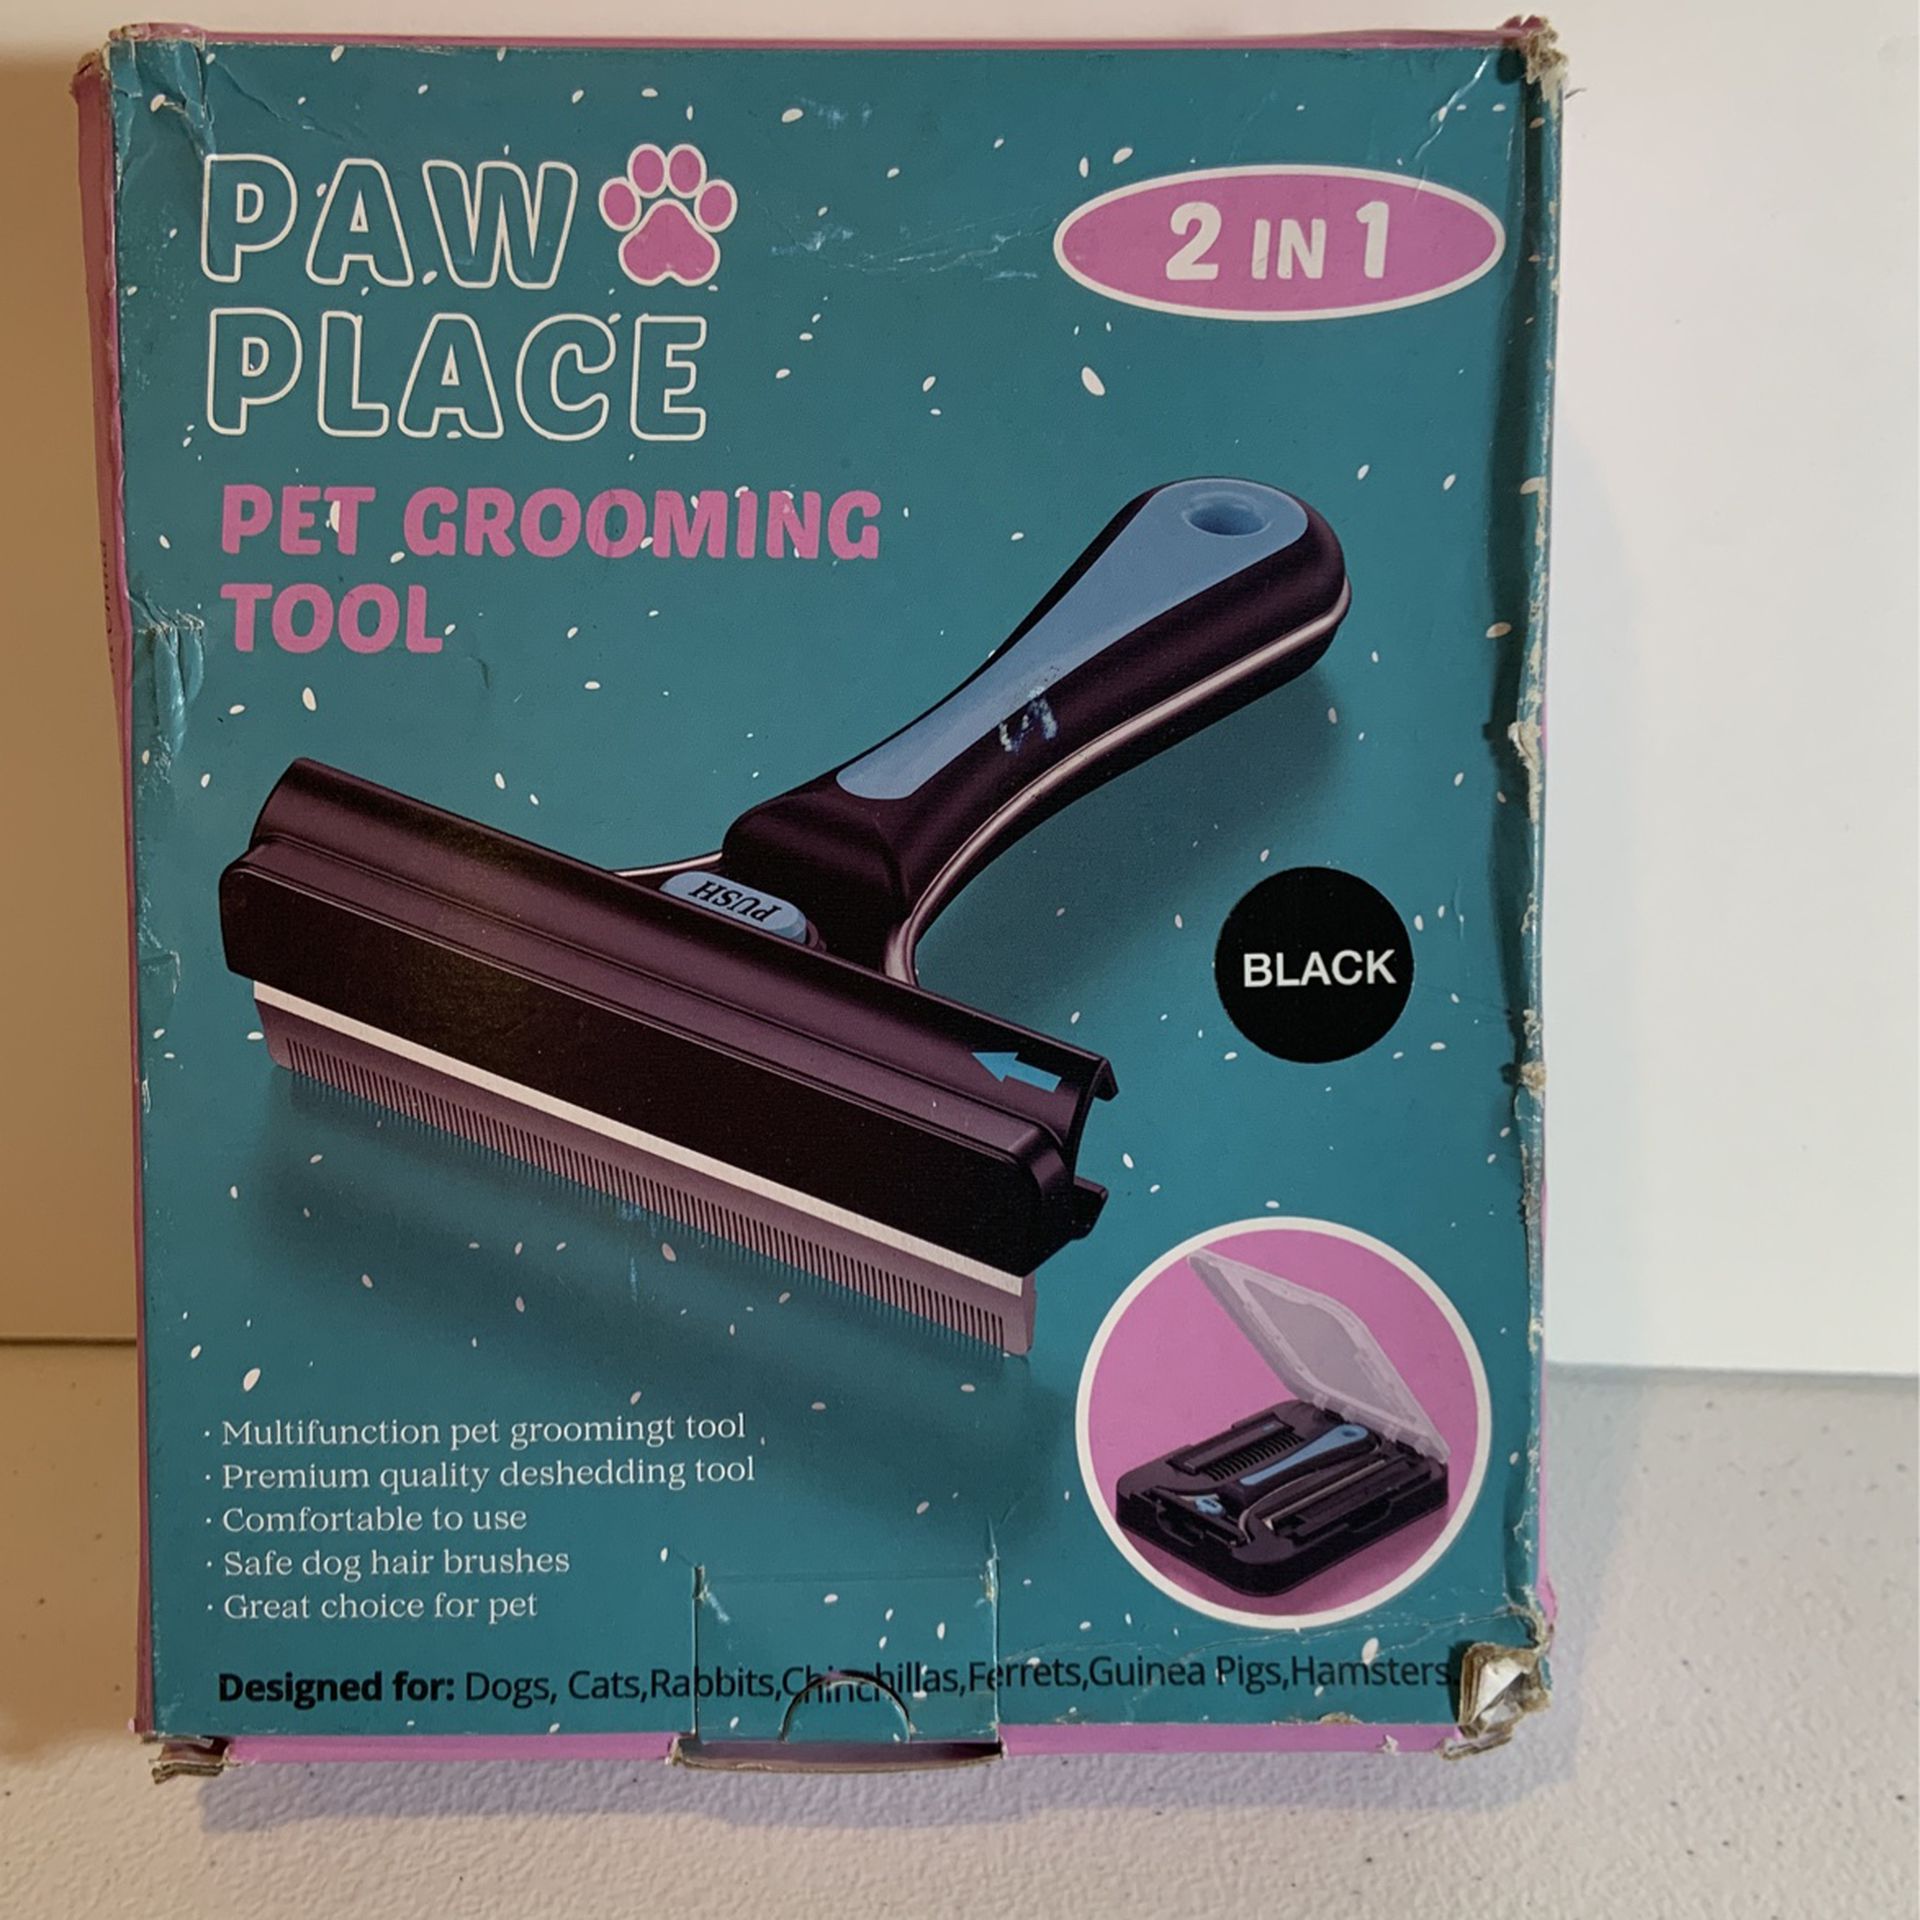 Paw Place Pet Grooming Tool.